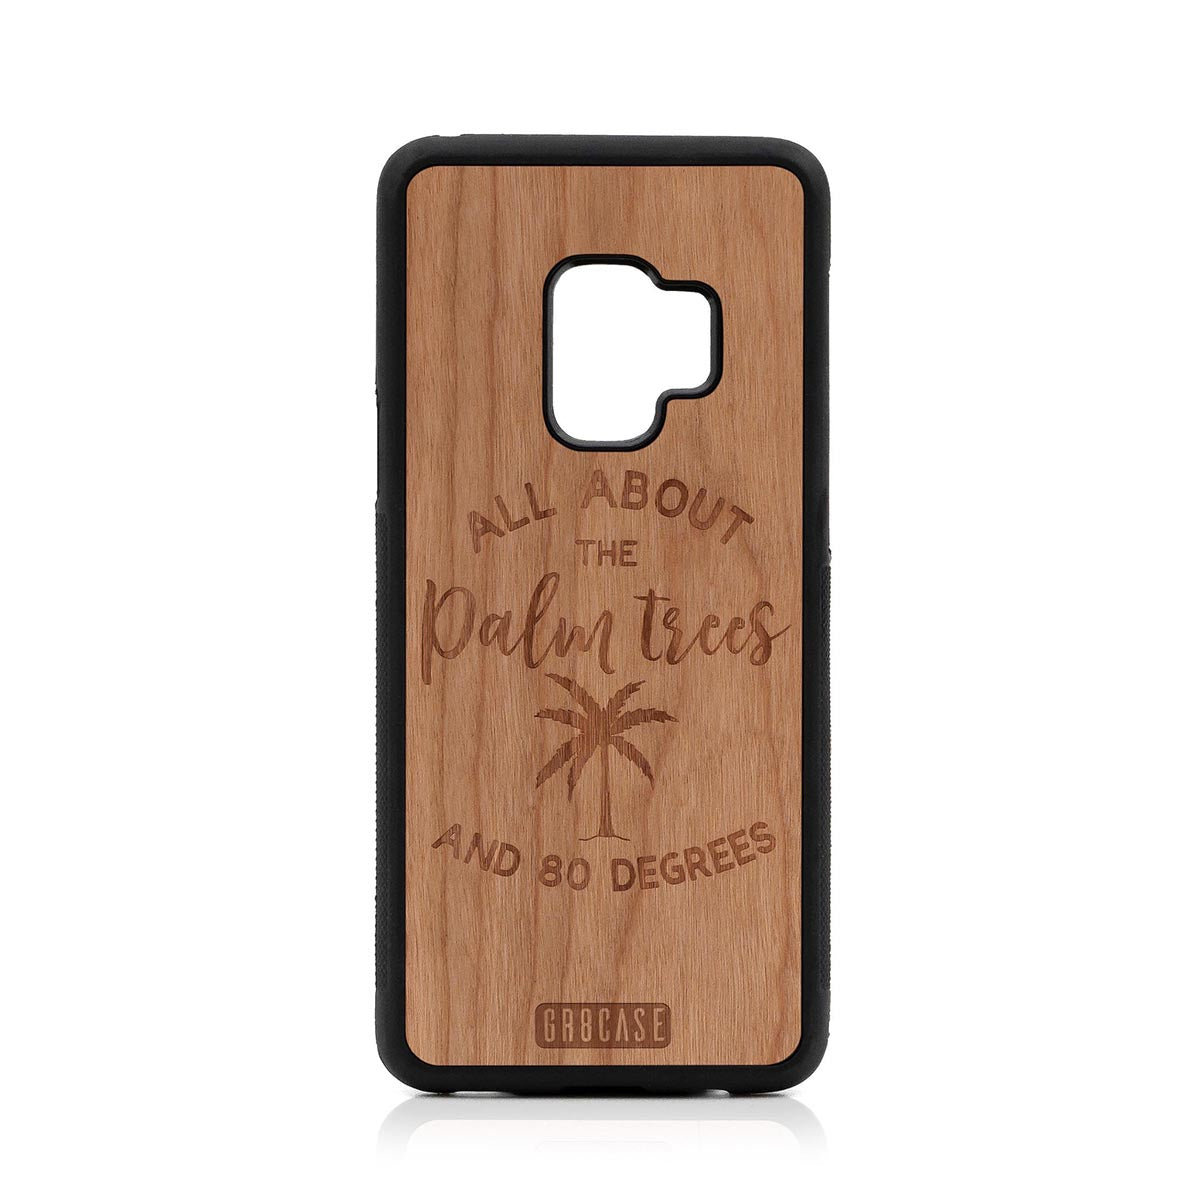 All About The Palm Trees and 80 Degrees Design Wood Case For Samsung Galaxy S9 by GR8CASE